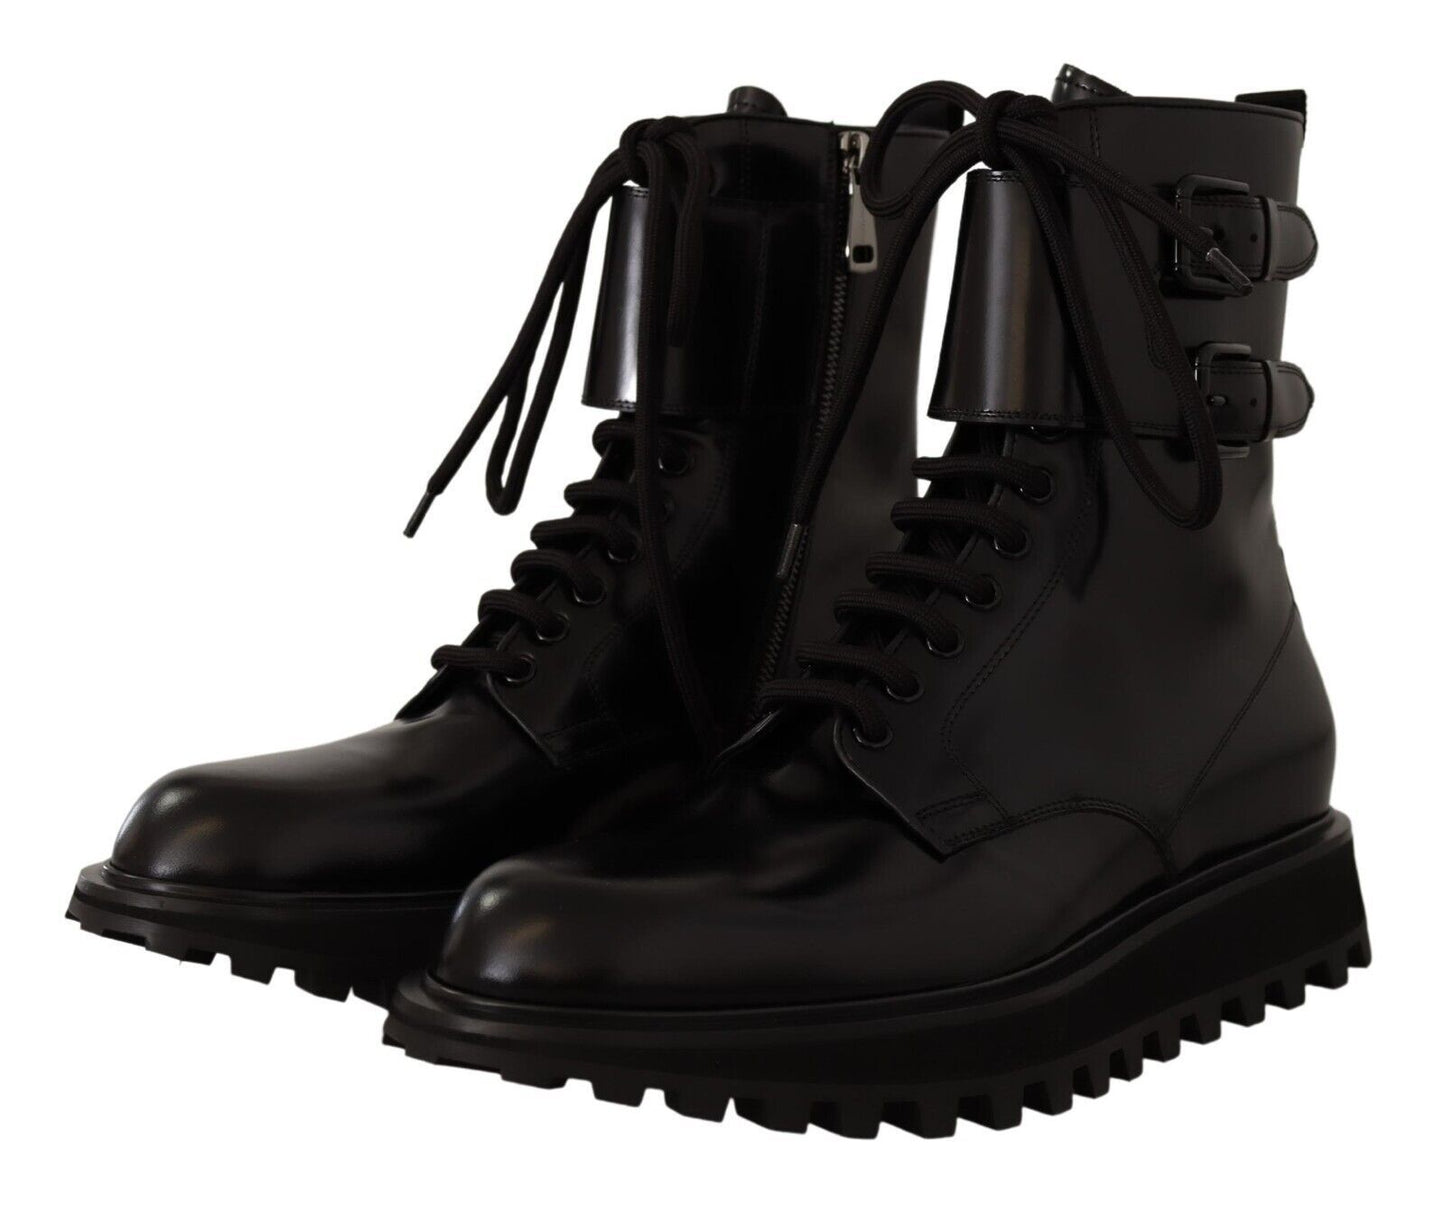 Dolce & gabbana black leather ankle boots